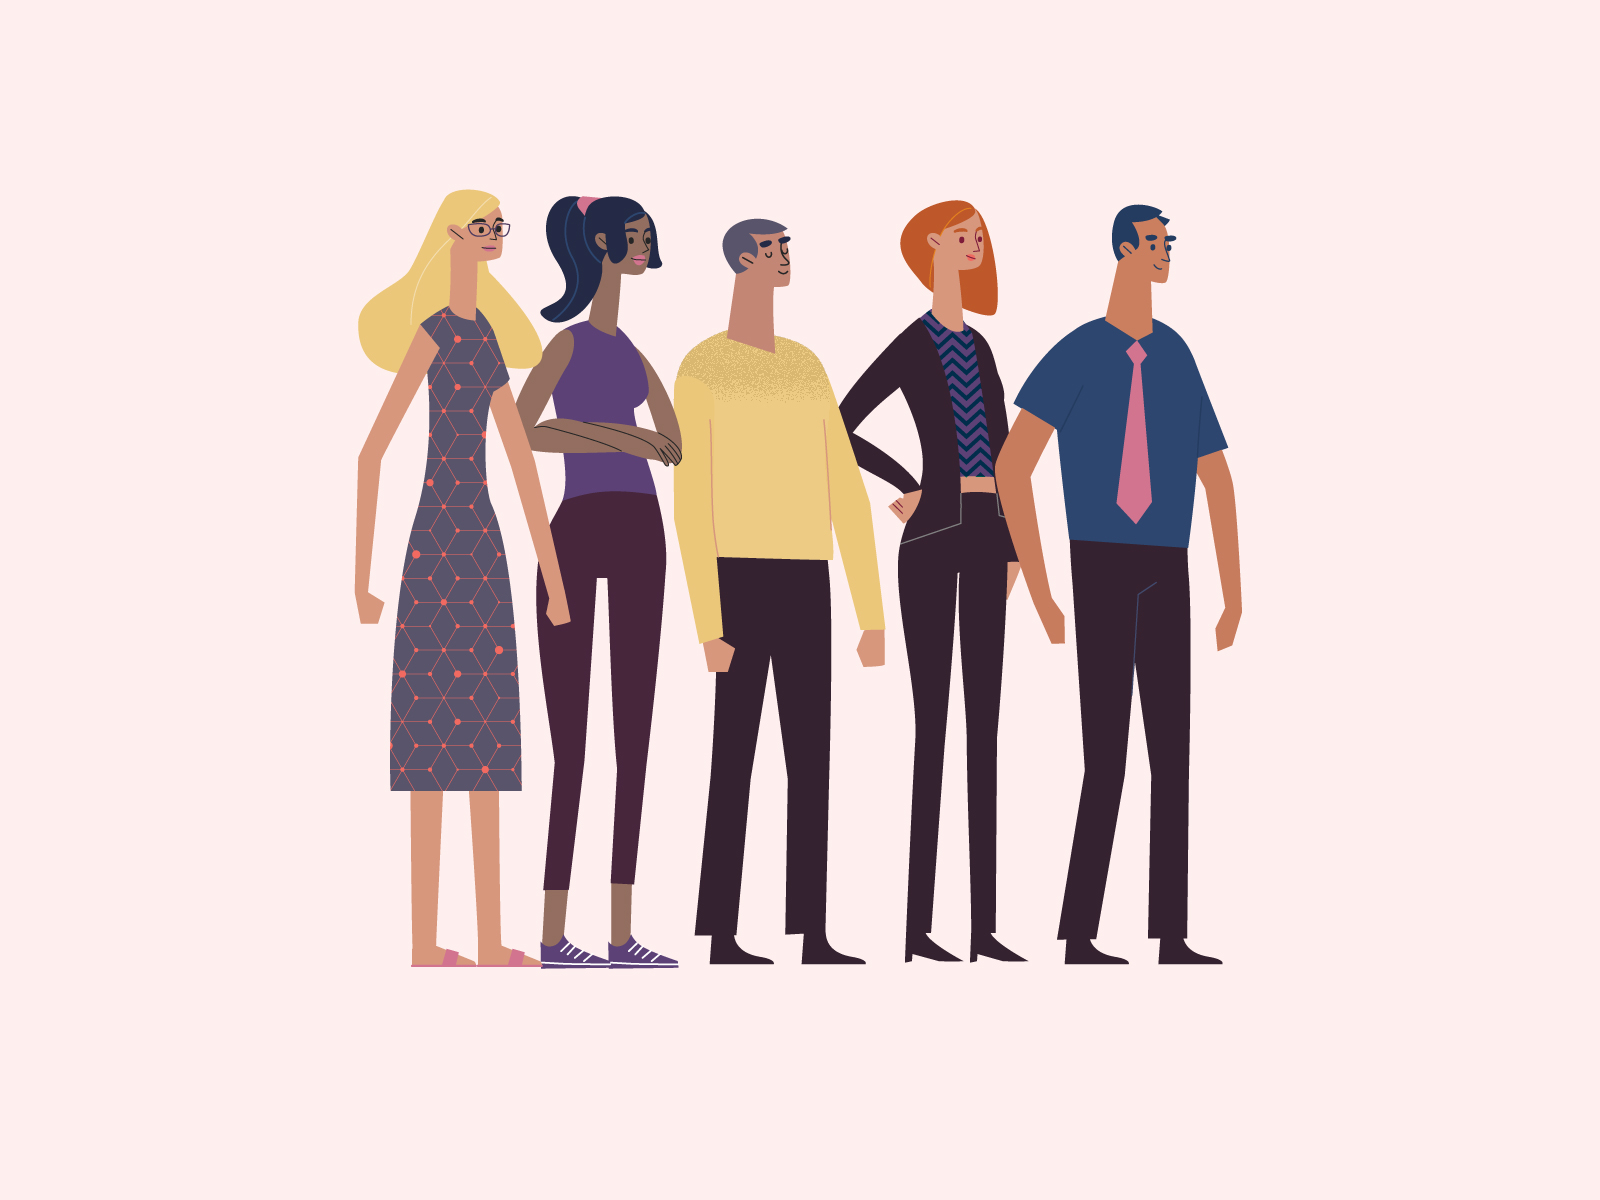 Group by Kris Howes on Dribbble